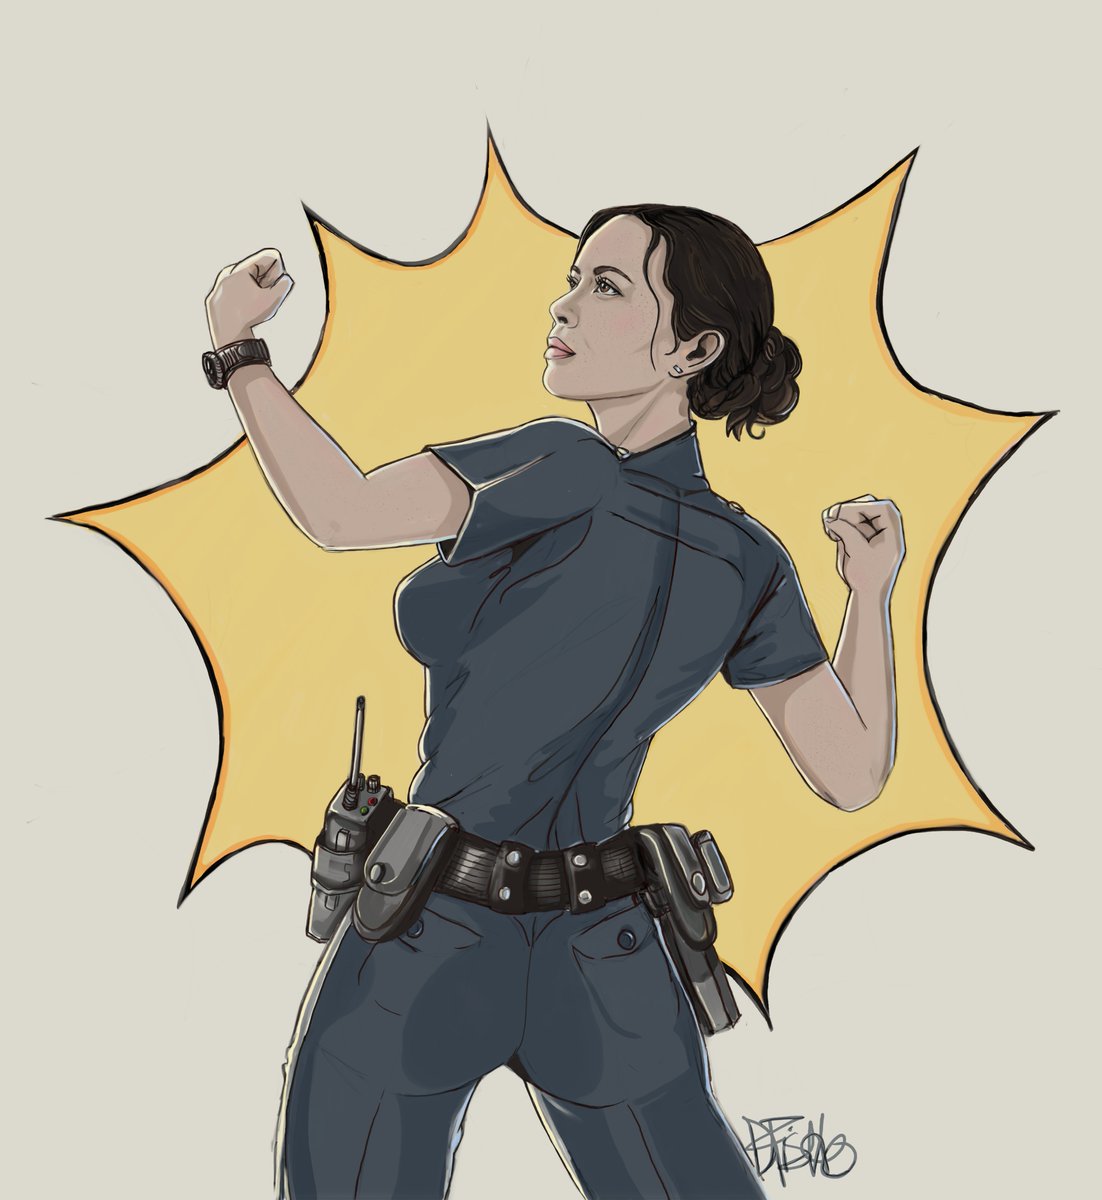 My previous quick draw colouring page #fanart #therookie @therookie  ended up spiraling into this. 'Fist of Justice' 😆 #lucychen #chenford #melissaoneil @Mel13Oneil  First superhero art. I think I likeeet.